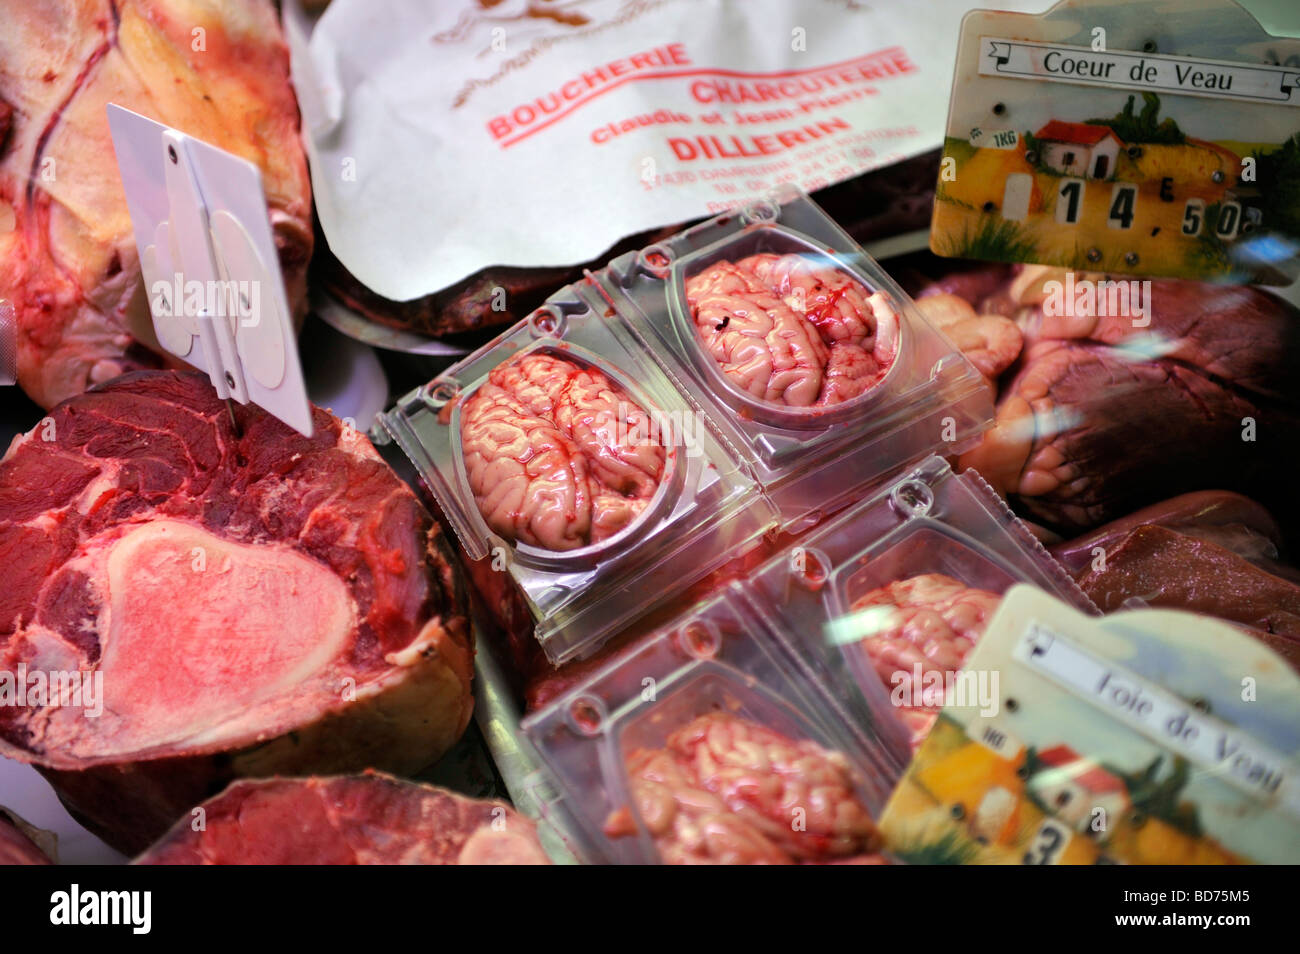 sheep brains for sale in a French market Stock Photo